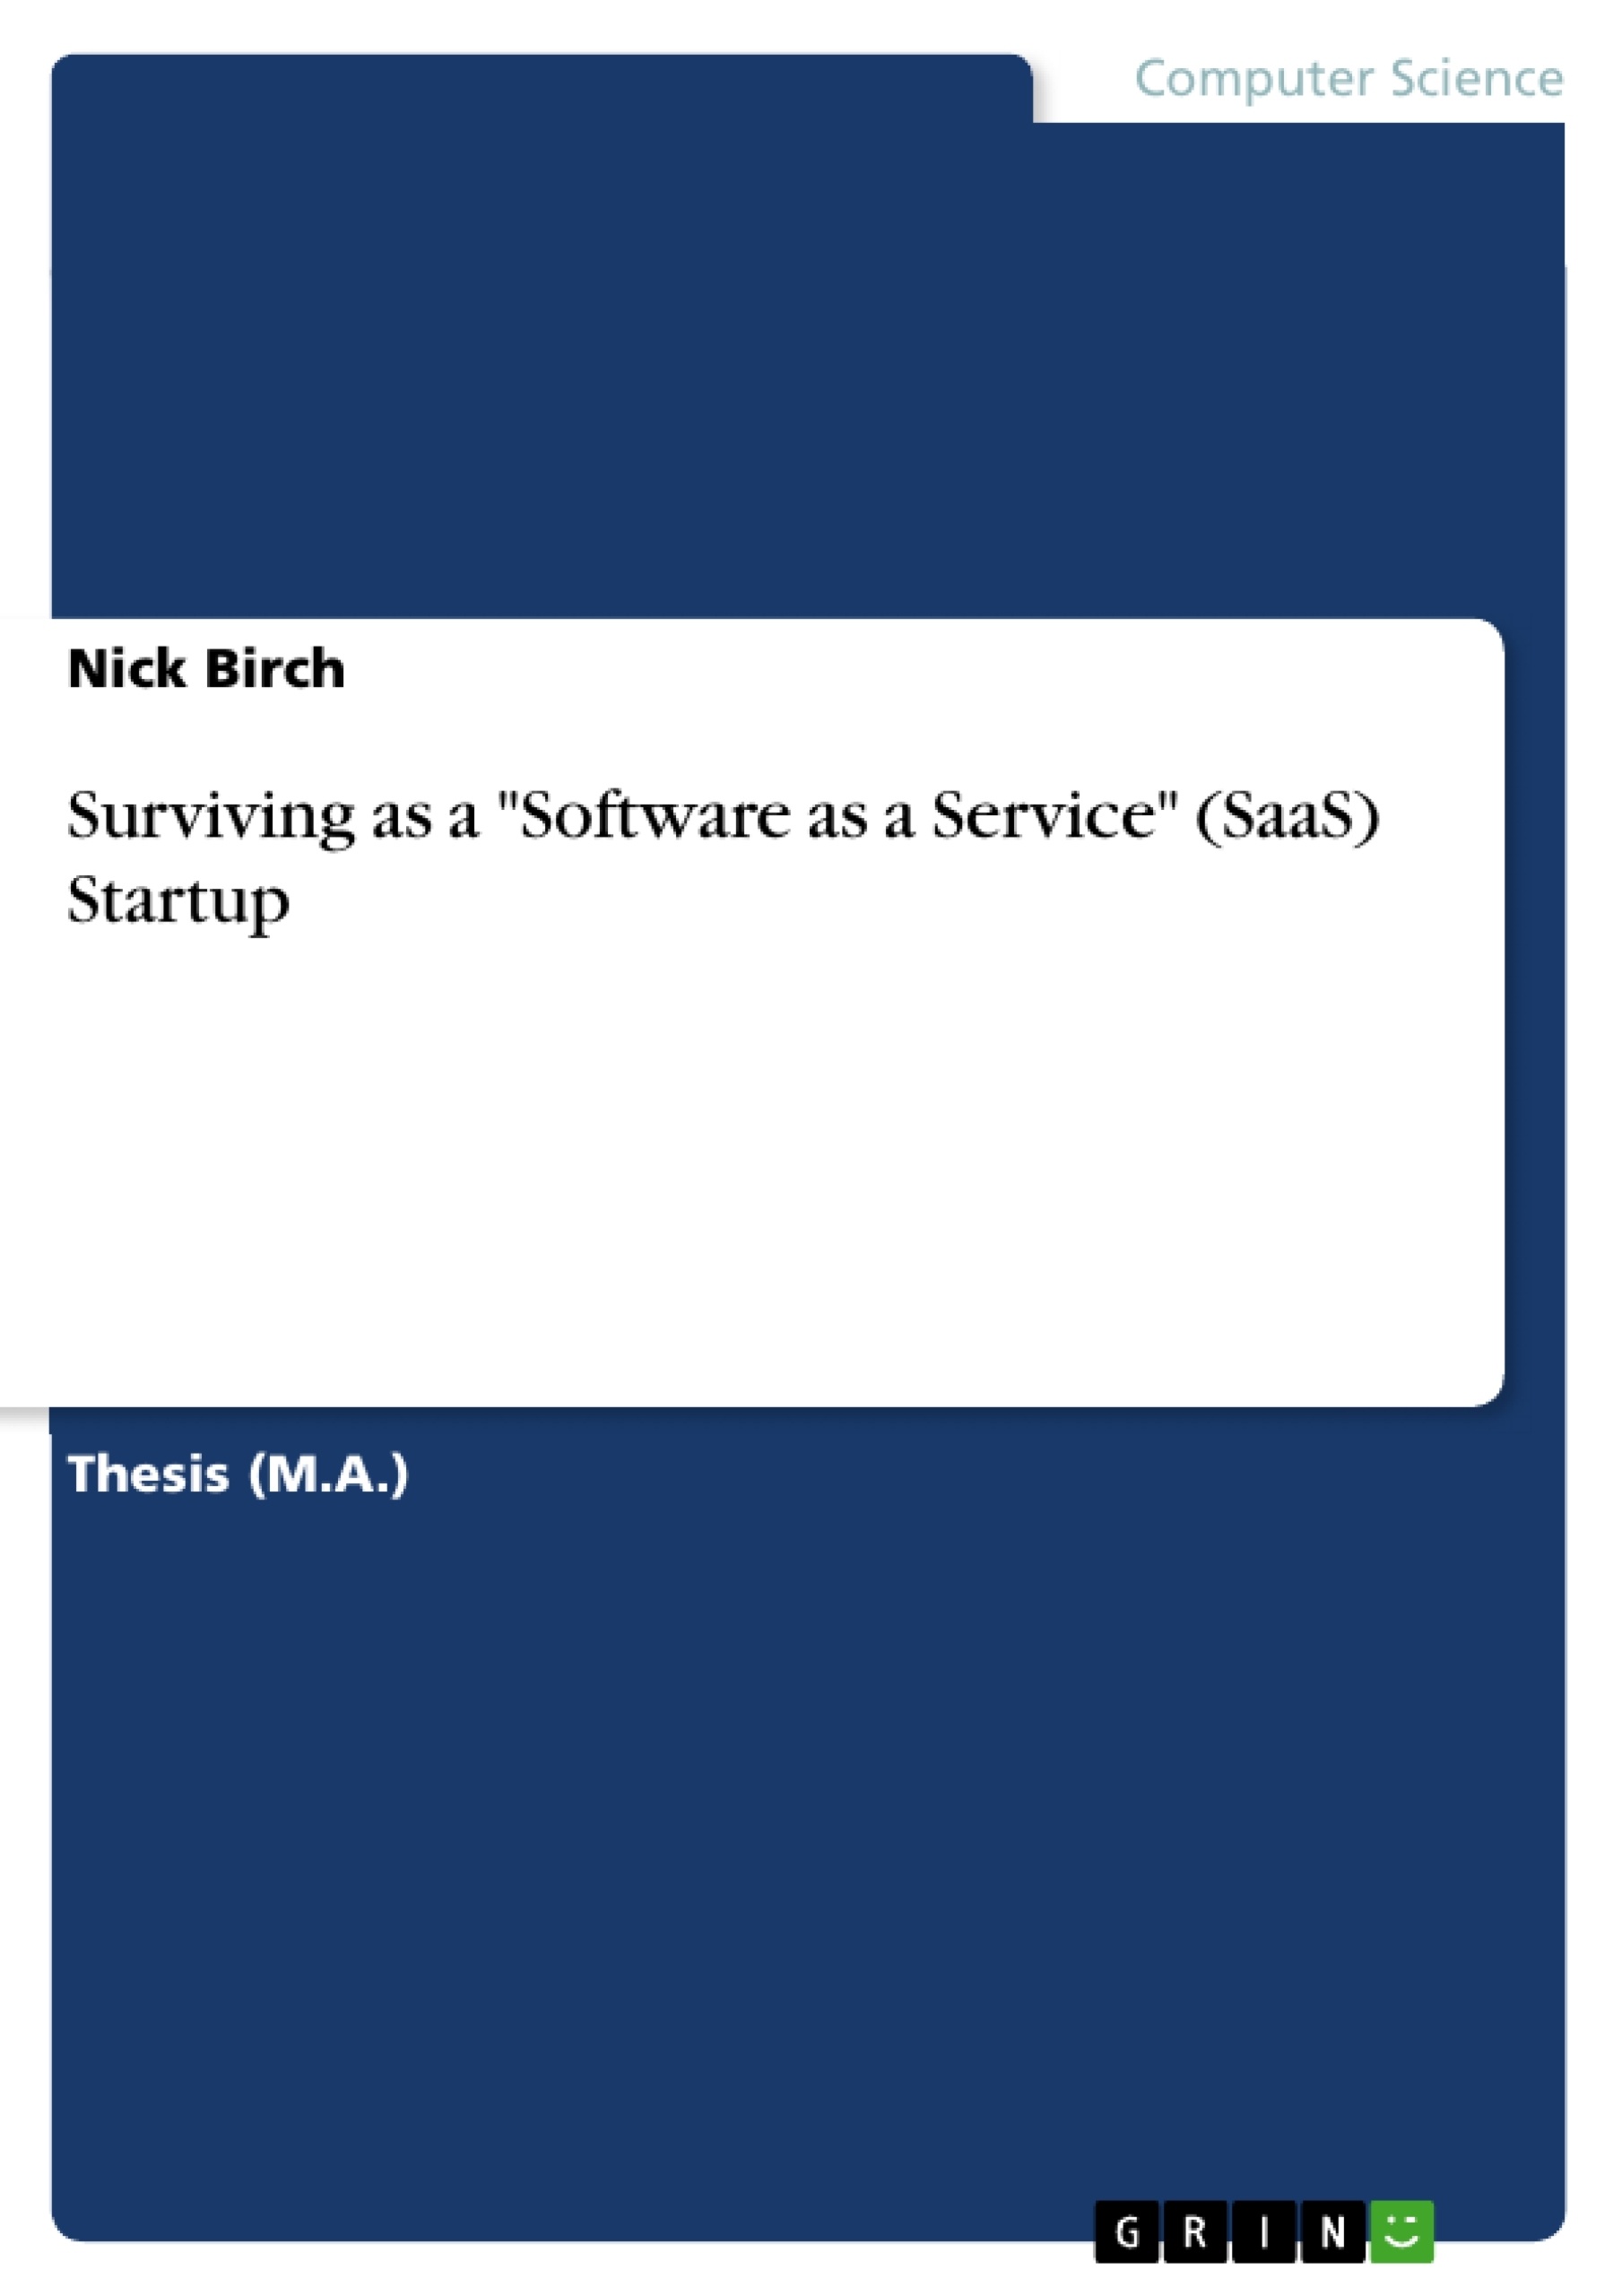 Título: Surviving as a "Software as a Service" (SaaS) Startup